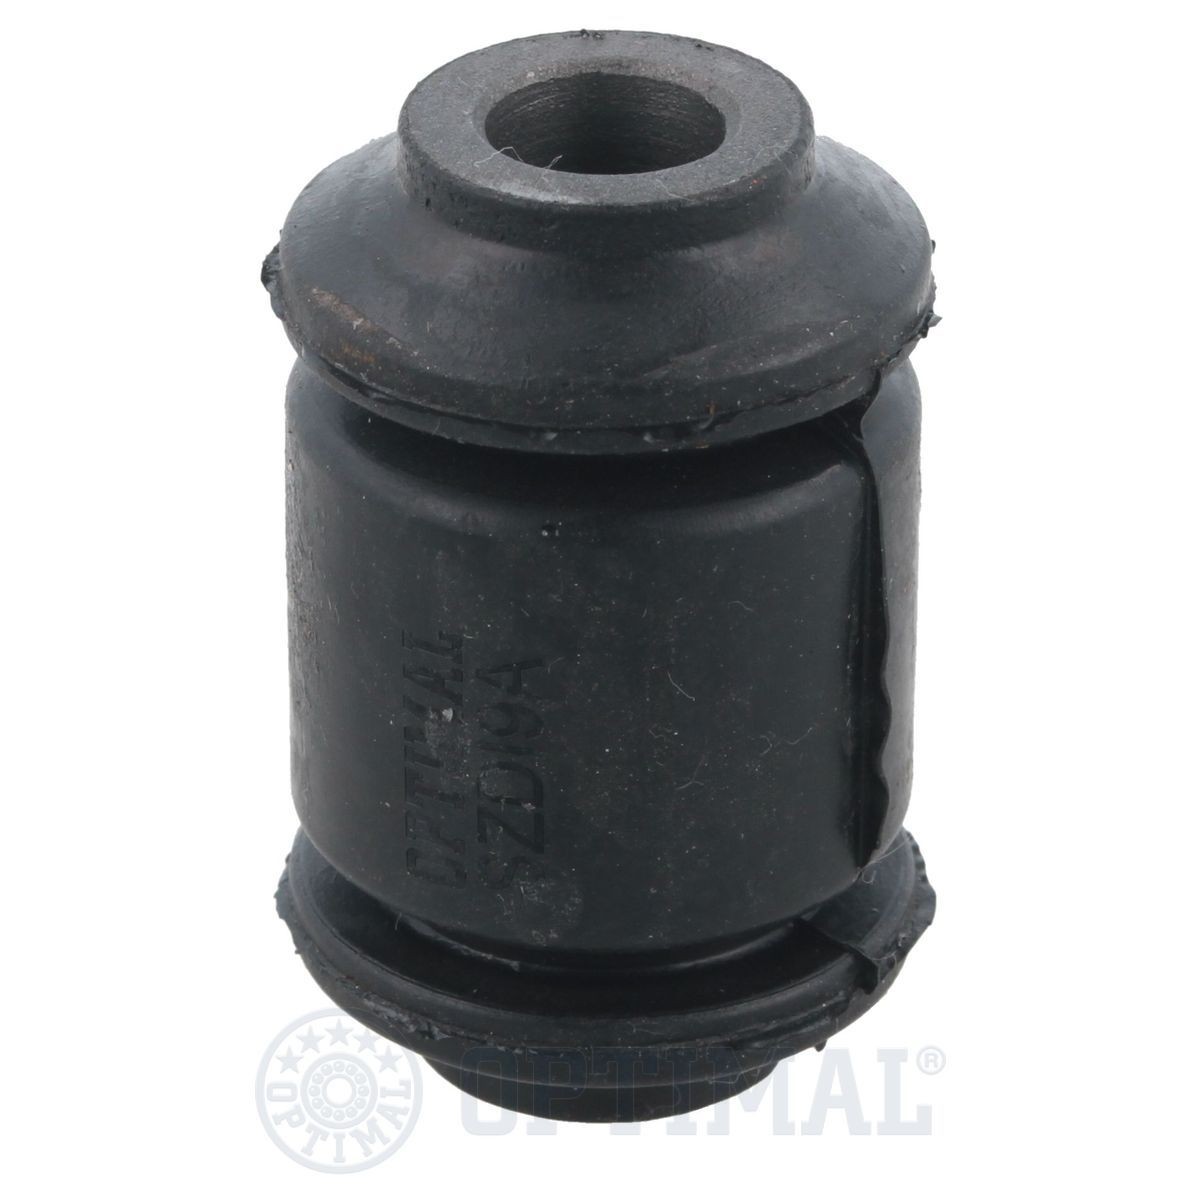 F9-0069 OPTIMAL Suspension bushes HYUNDAI Lower, Front Axle, both sides, Rubber-Metal Mount, for control arm